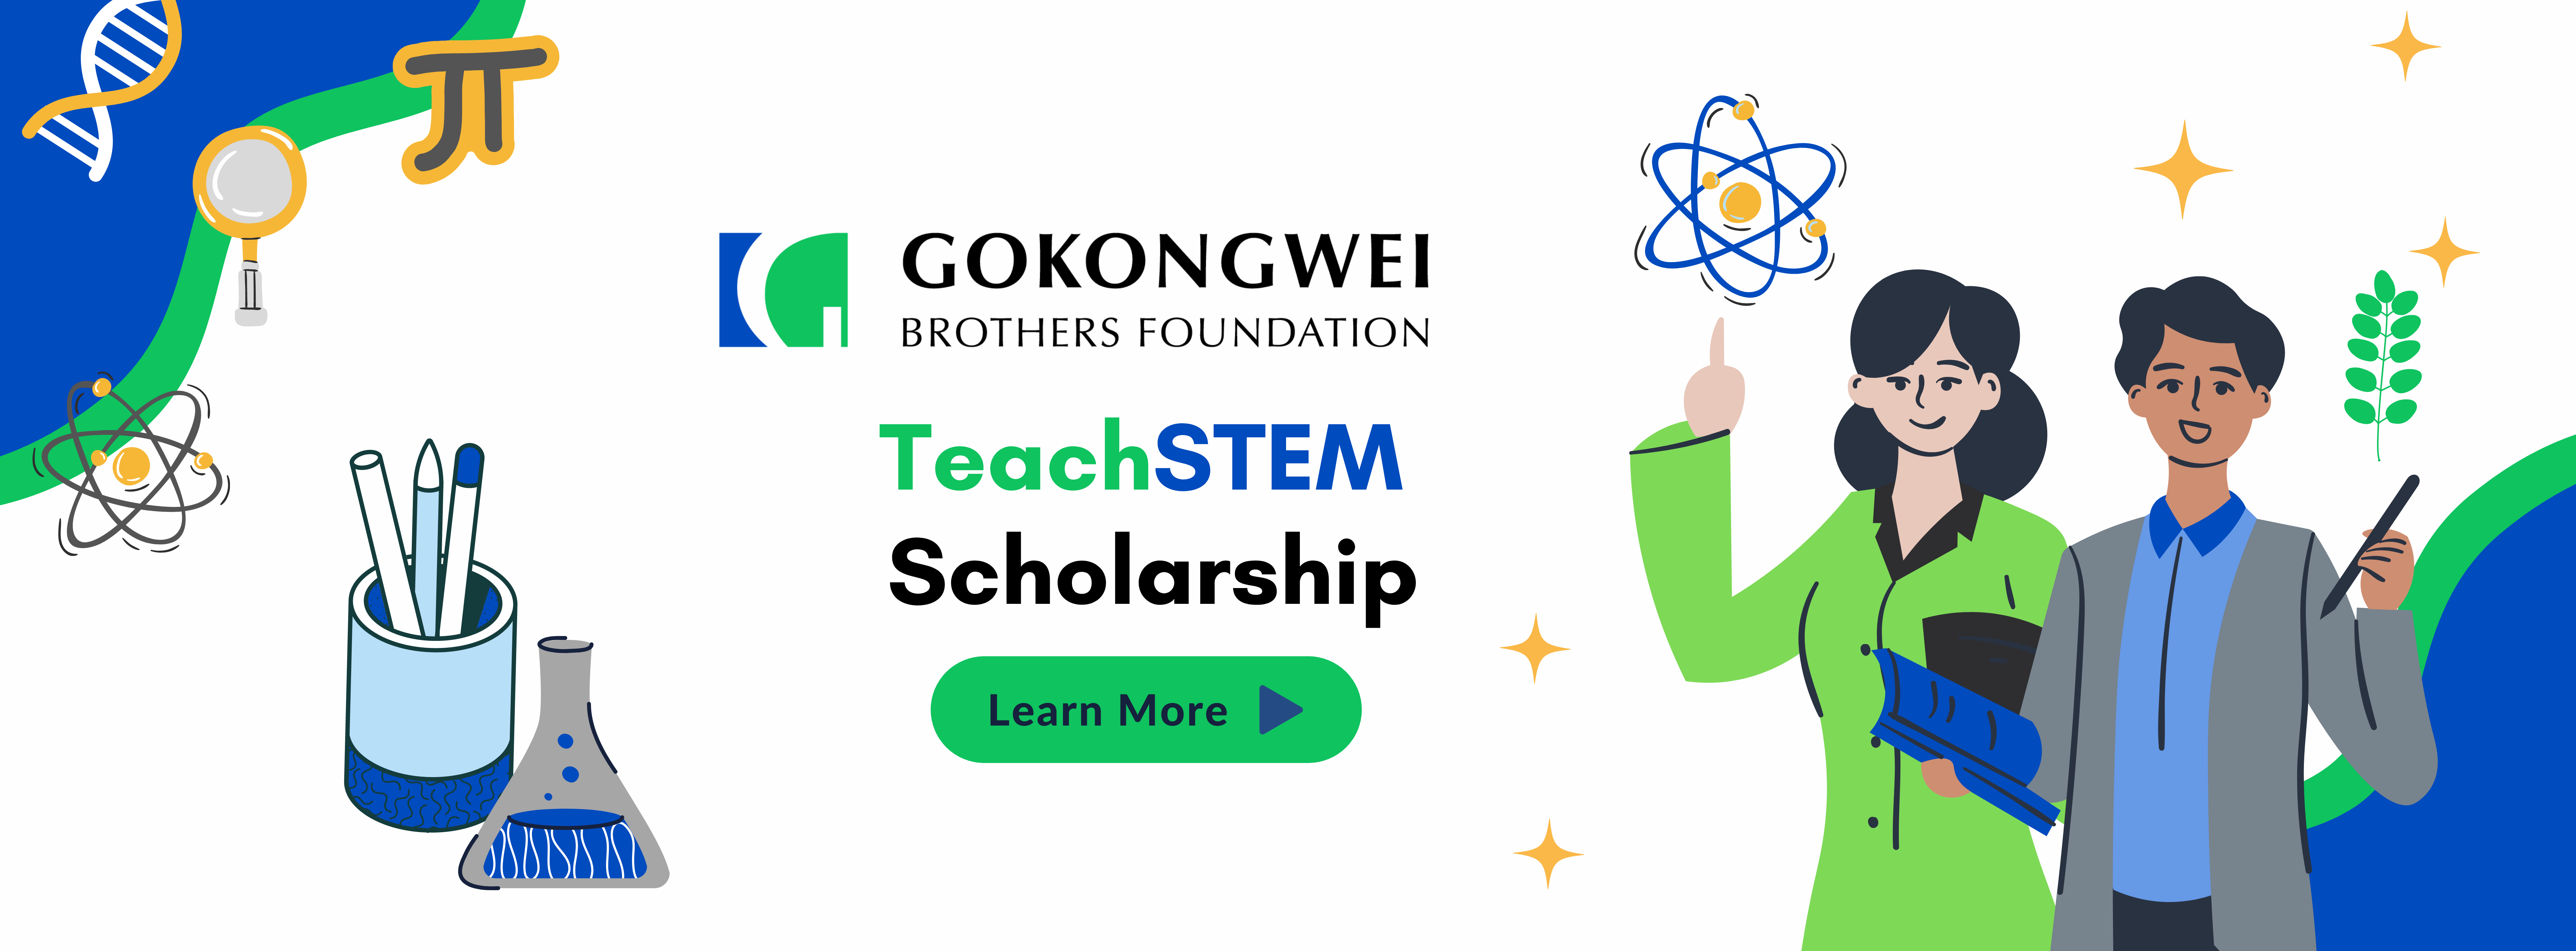 DepEd supports GBF’s mission for STEM educators through TeachSTEM Scholarship